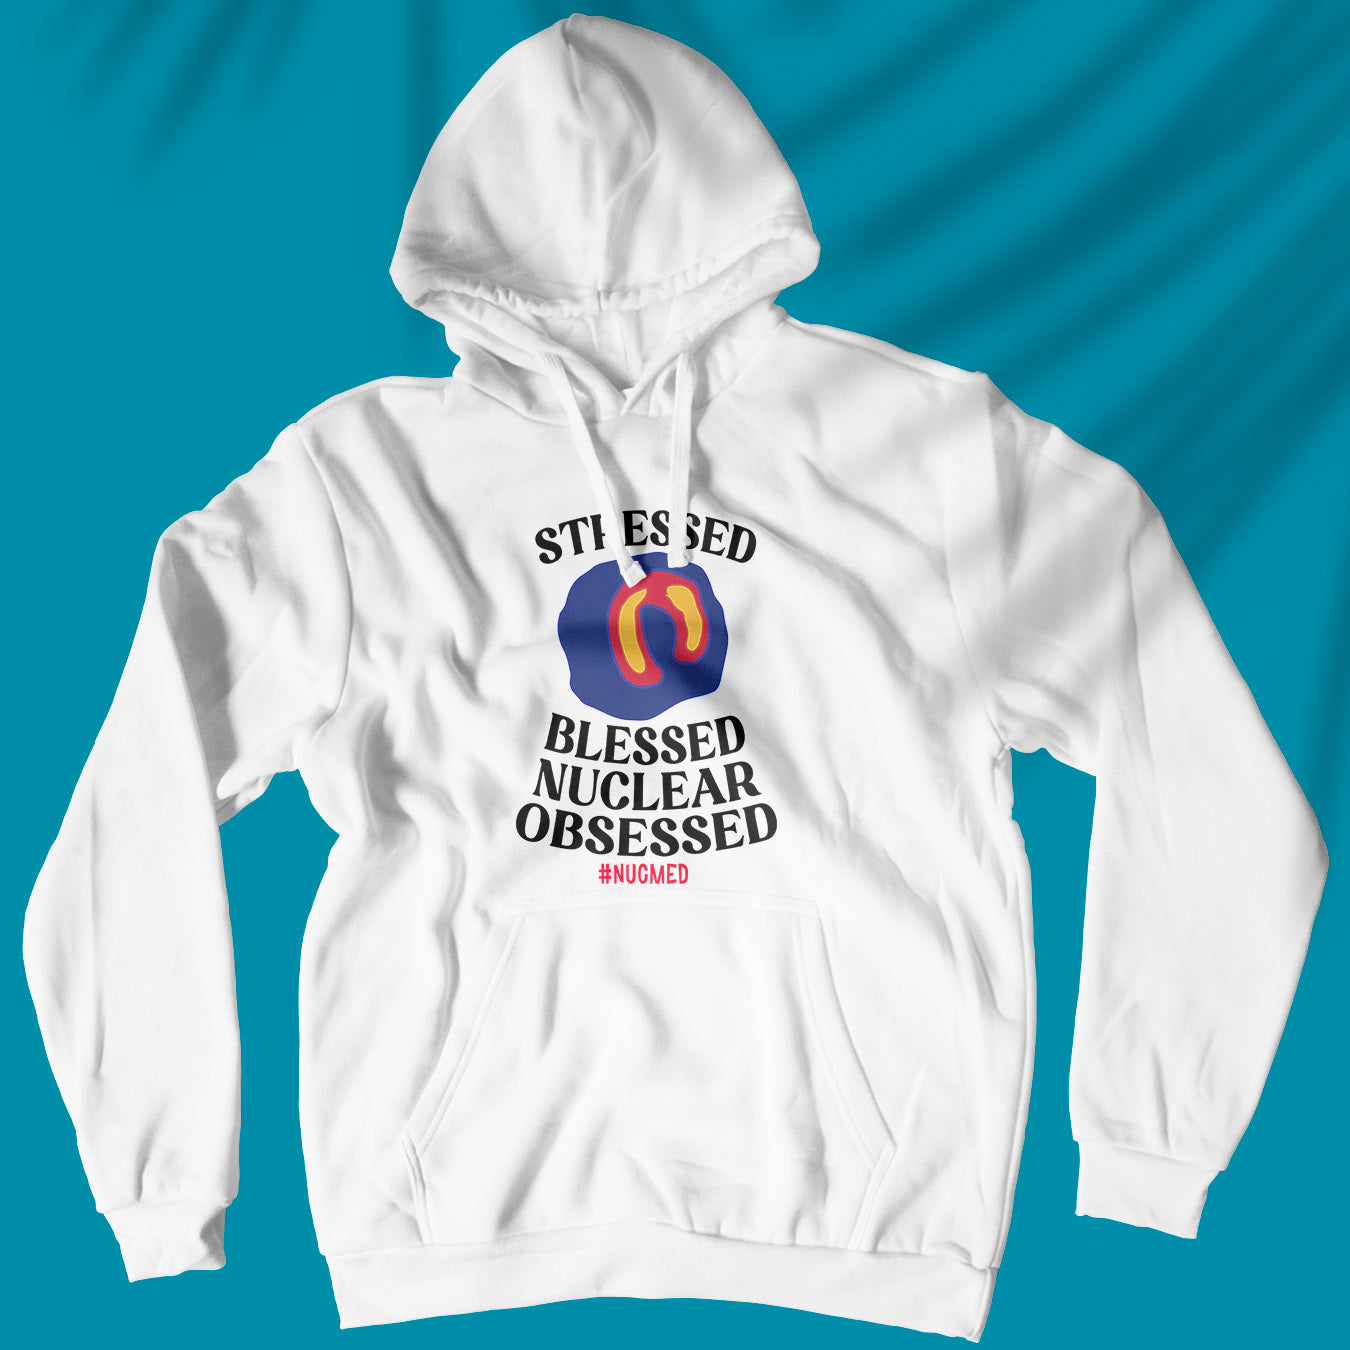 Stressed Blessed Nuclear Obsessed - Unisex Hoodie